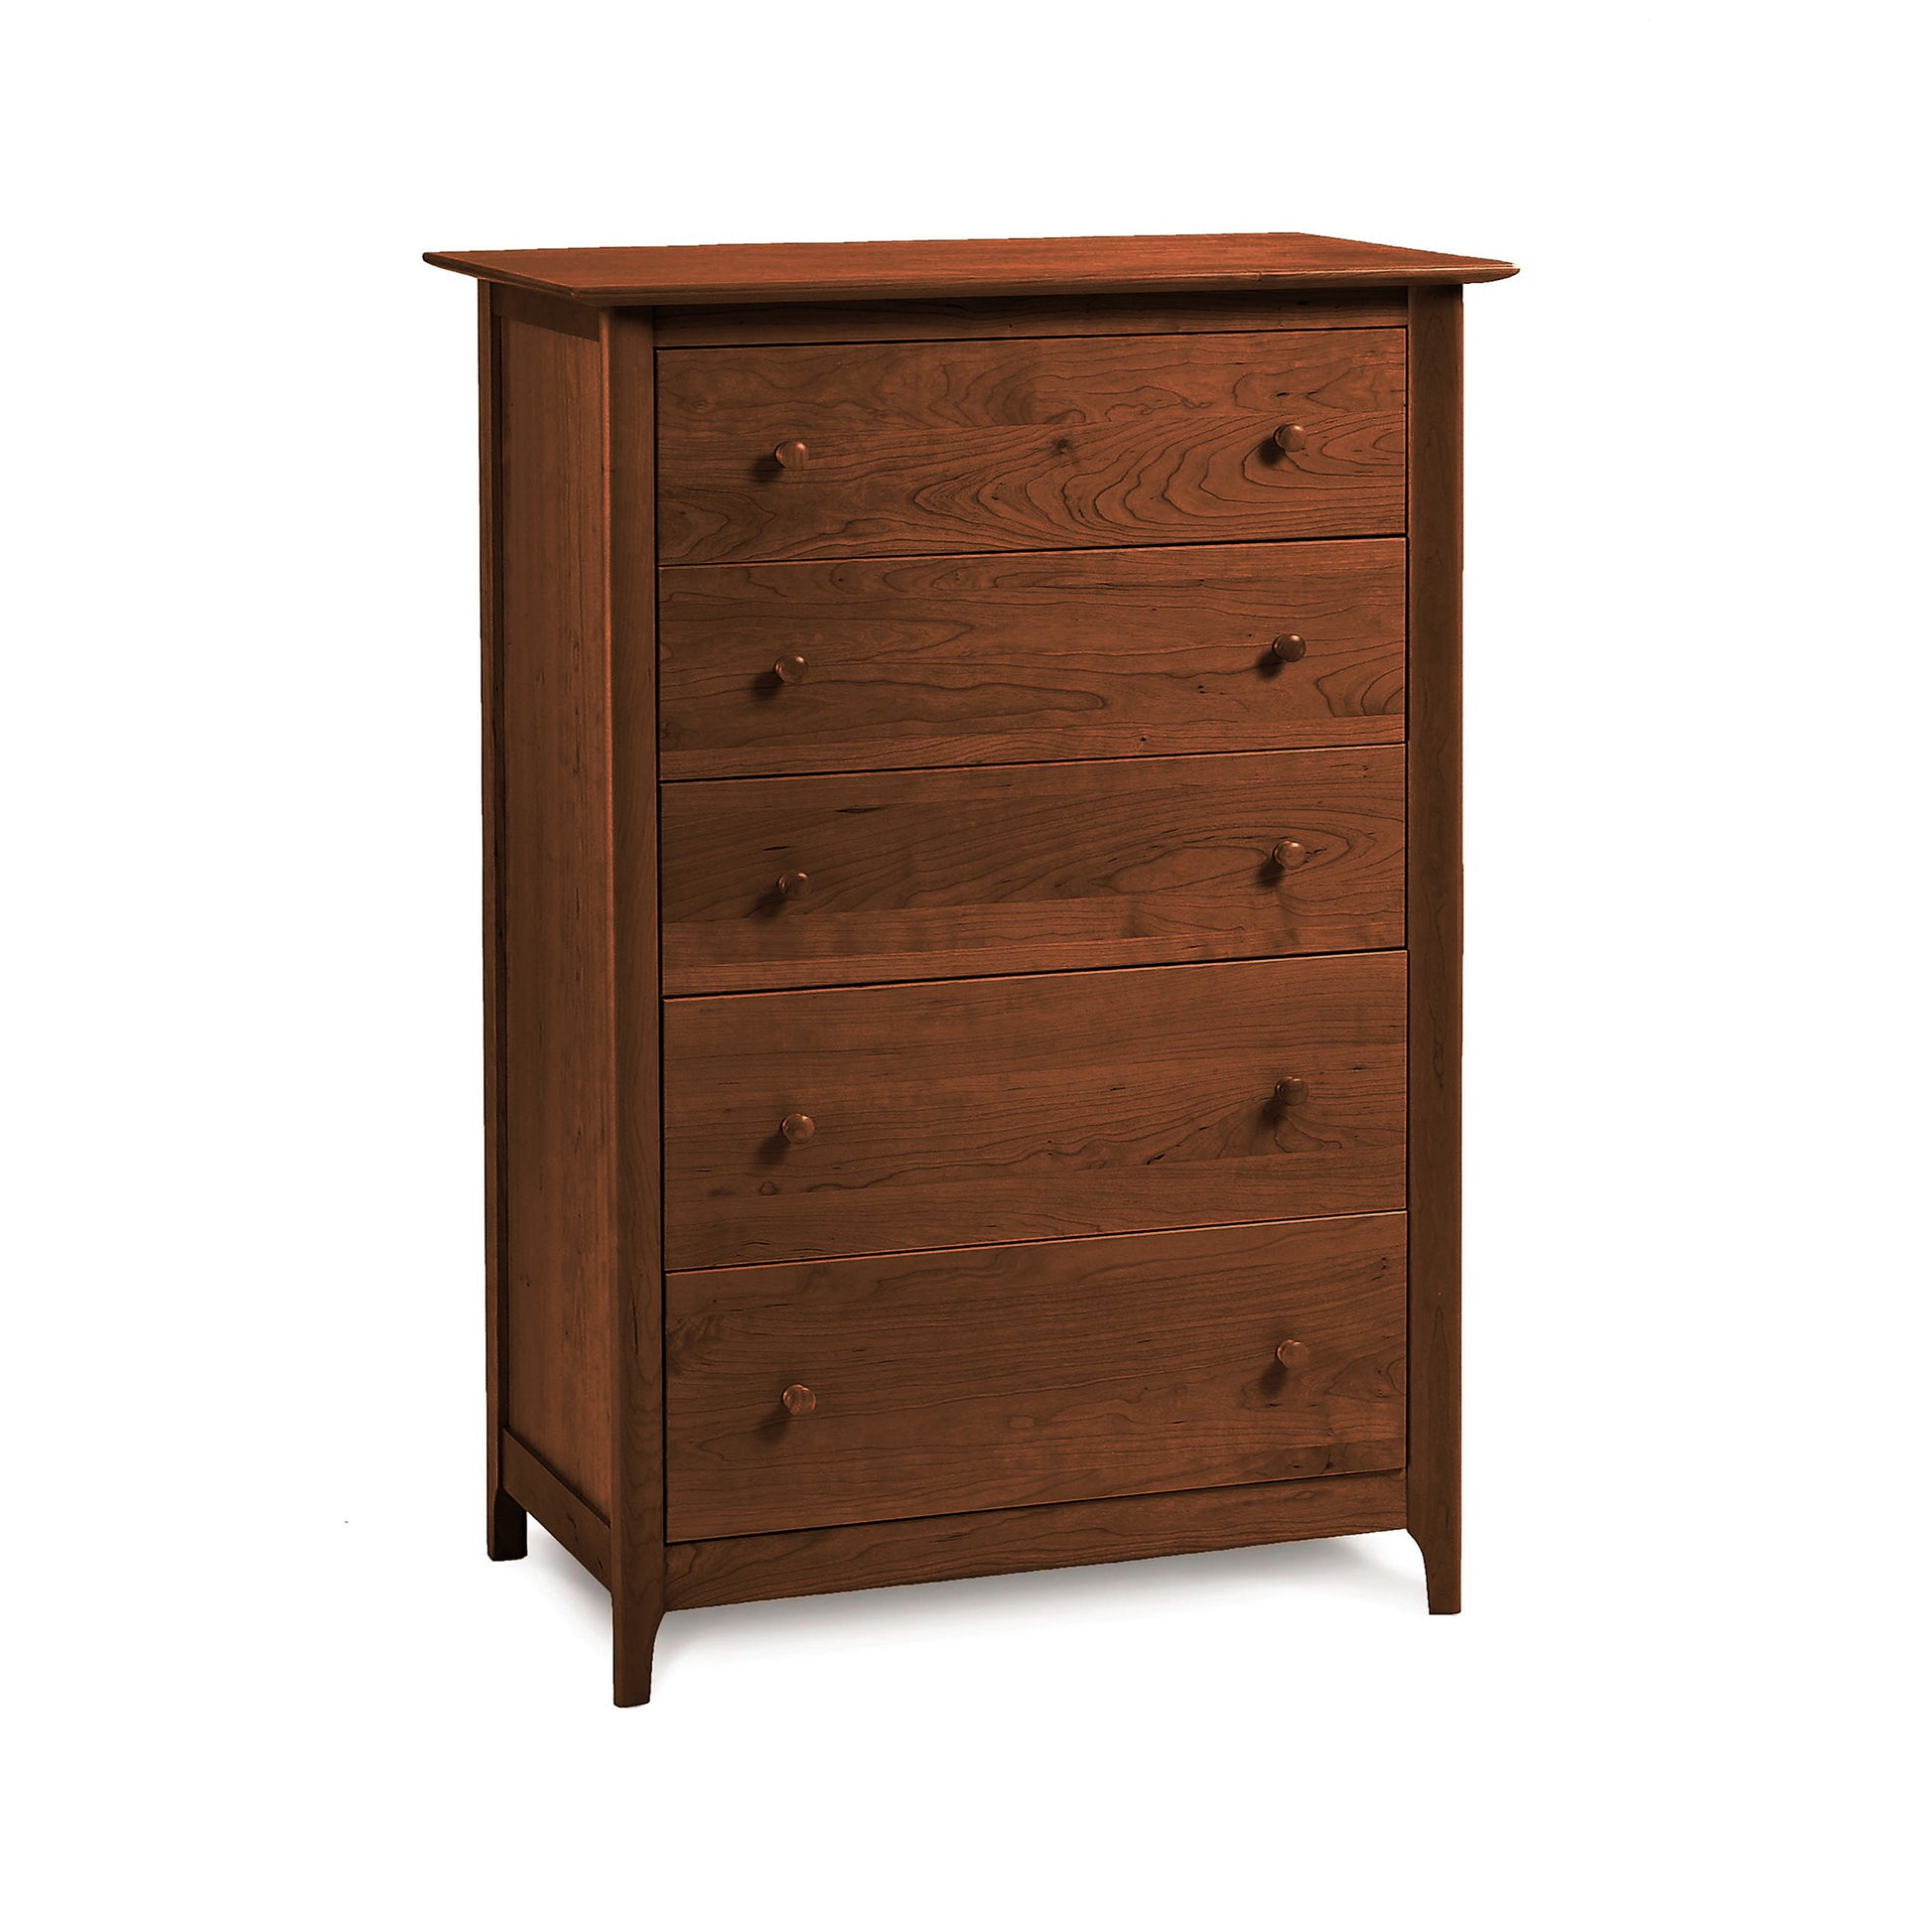 A handmade Copeland Furniture 5-Drawer Chest with a shaker design, made from cherry wood, set on a white background.